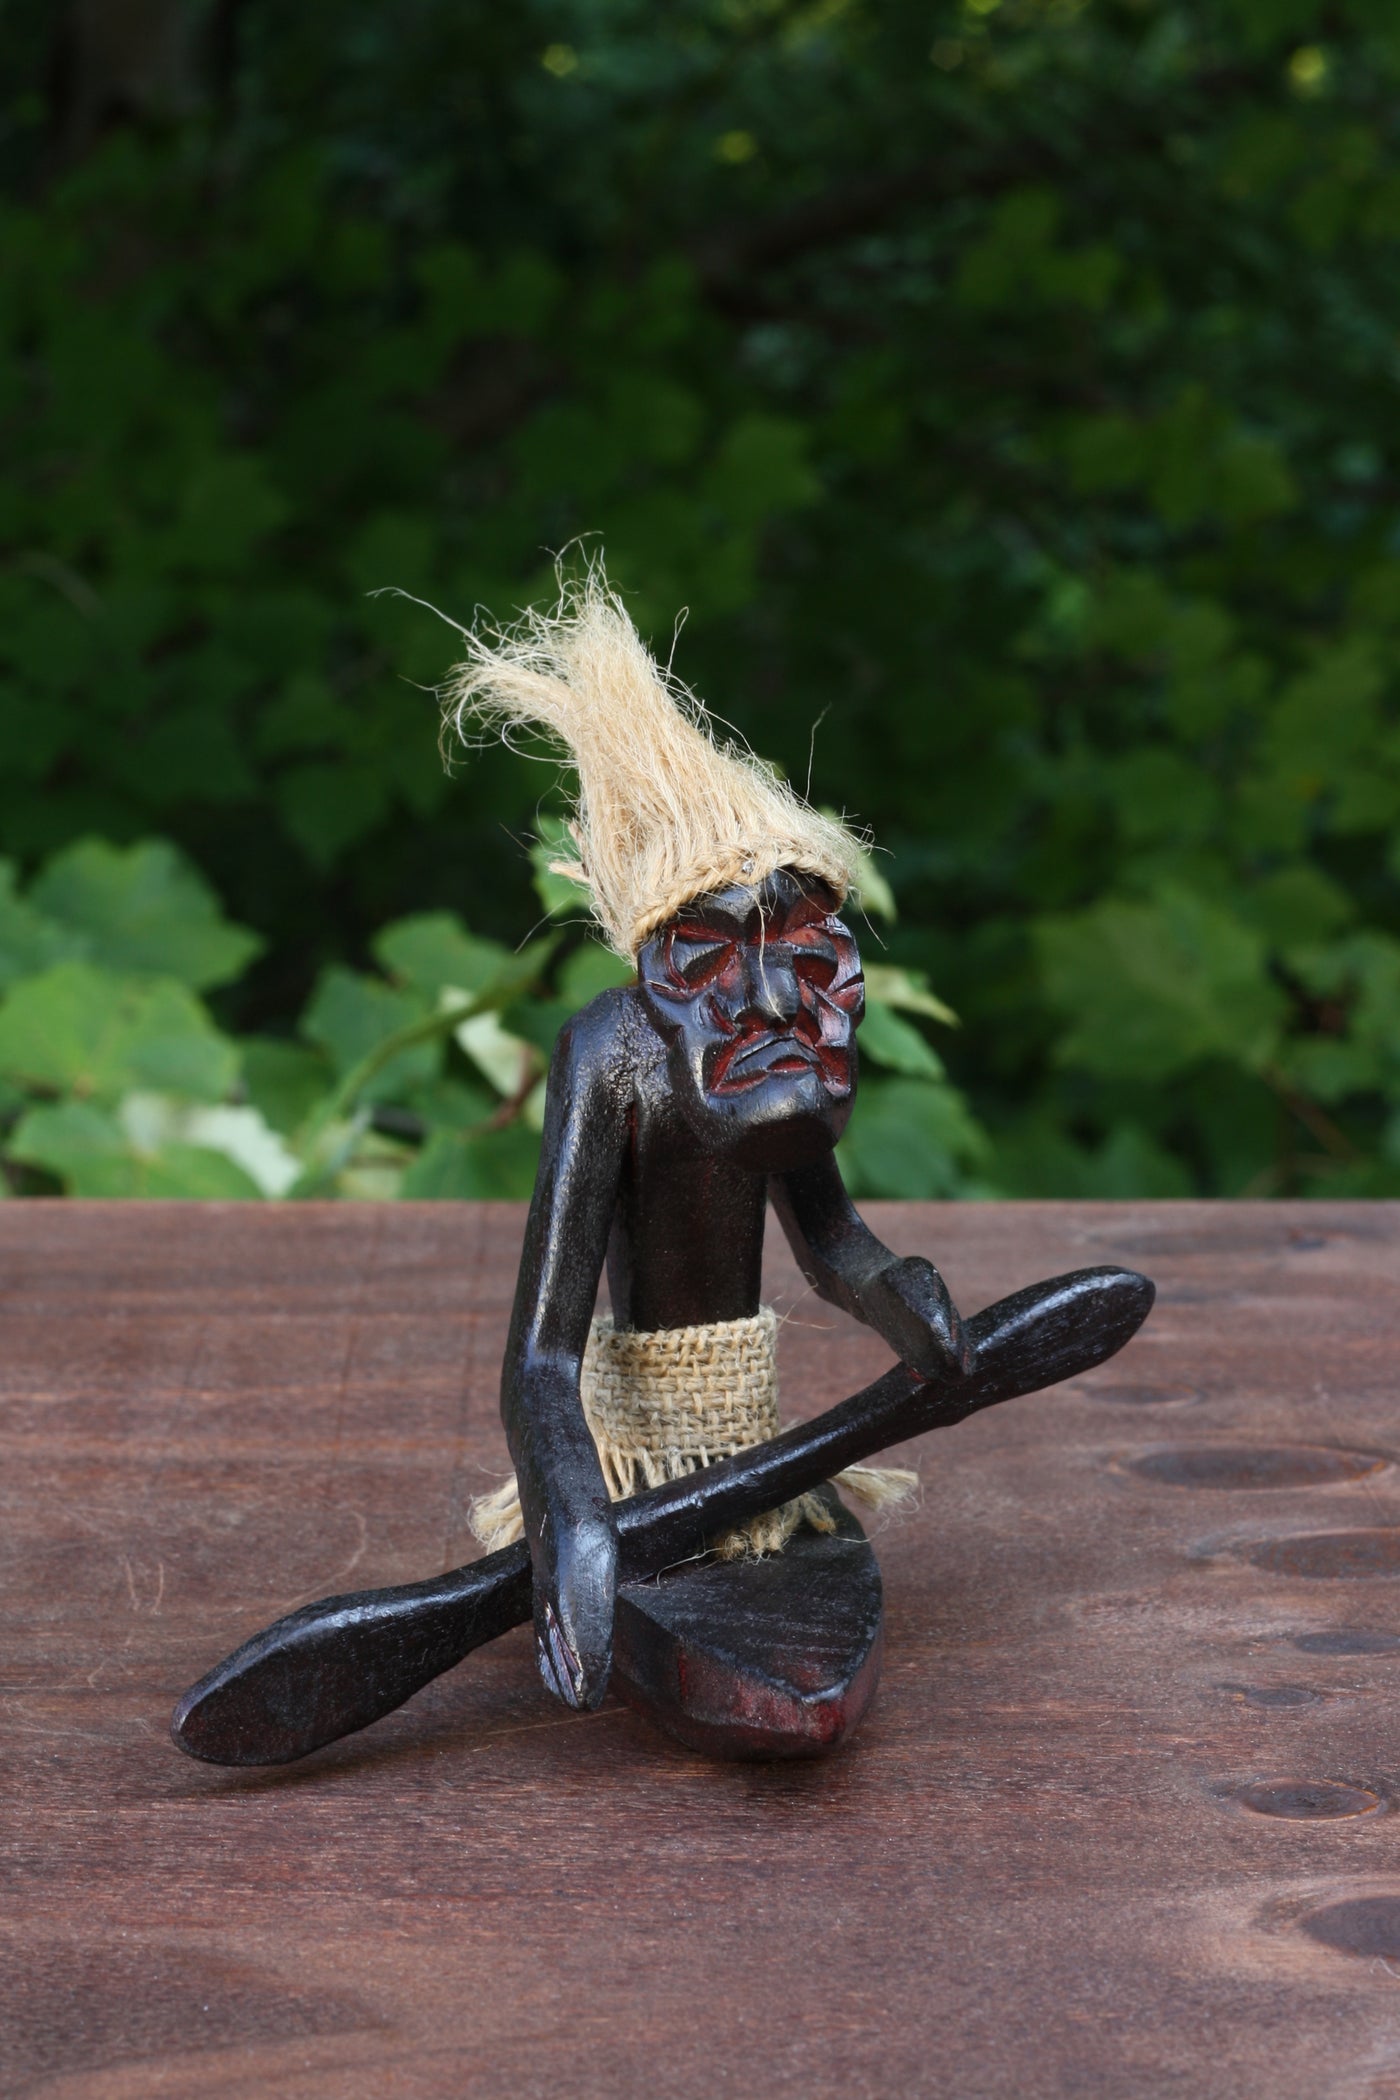 Handmade Wooden Primitive Tribal Kayaking Statue Canoe Funny Sculpture Tiki Bar Handcrafted Unique Gift Decor Accent Figurine Hand Carved - C